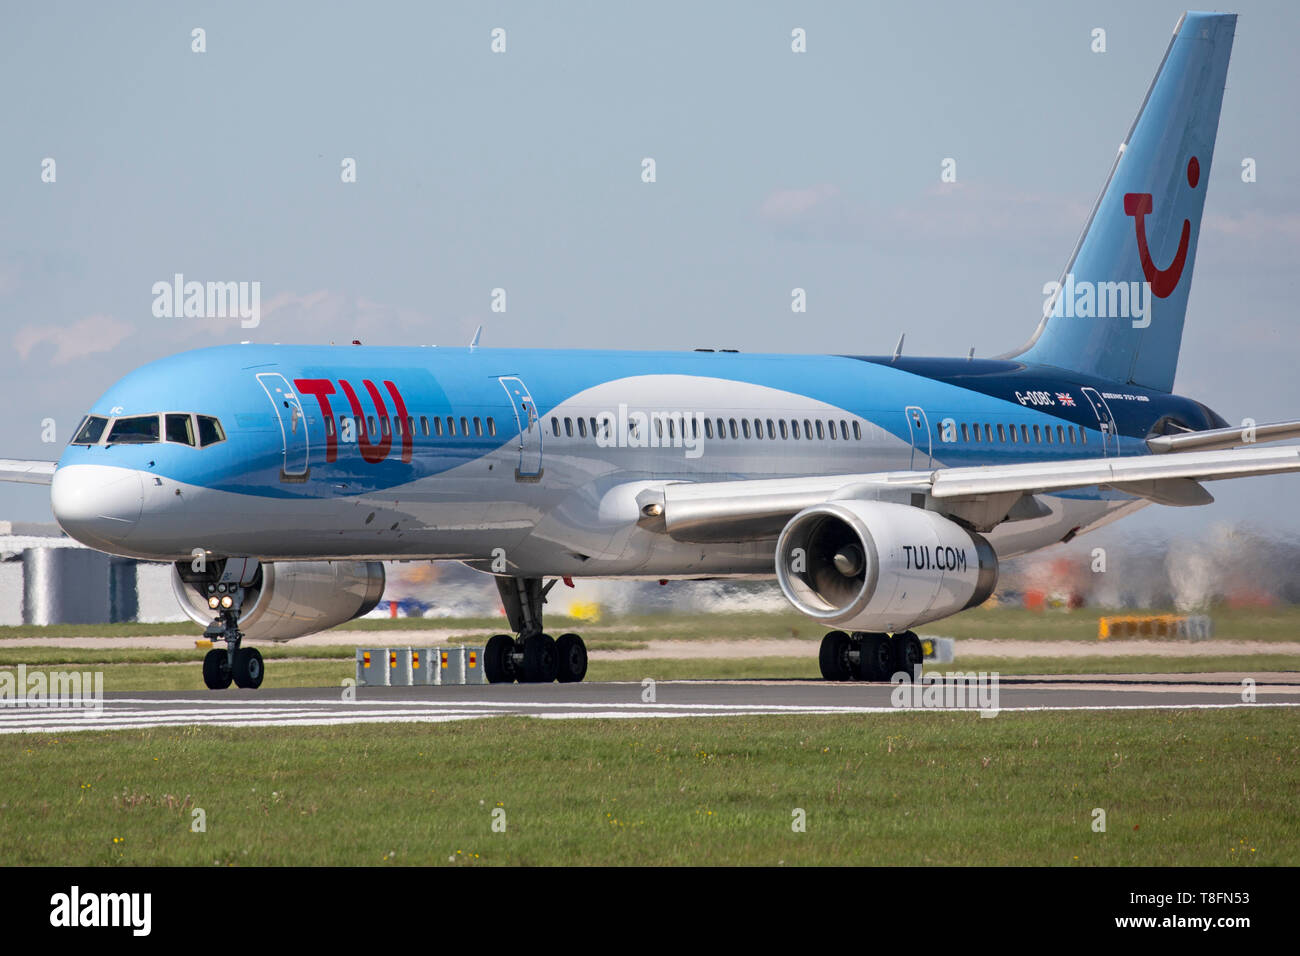 A TUI Airways Boeing 757-200, registration G-OOBC, taking off from Manchester Airport, England. Stock Photo